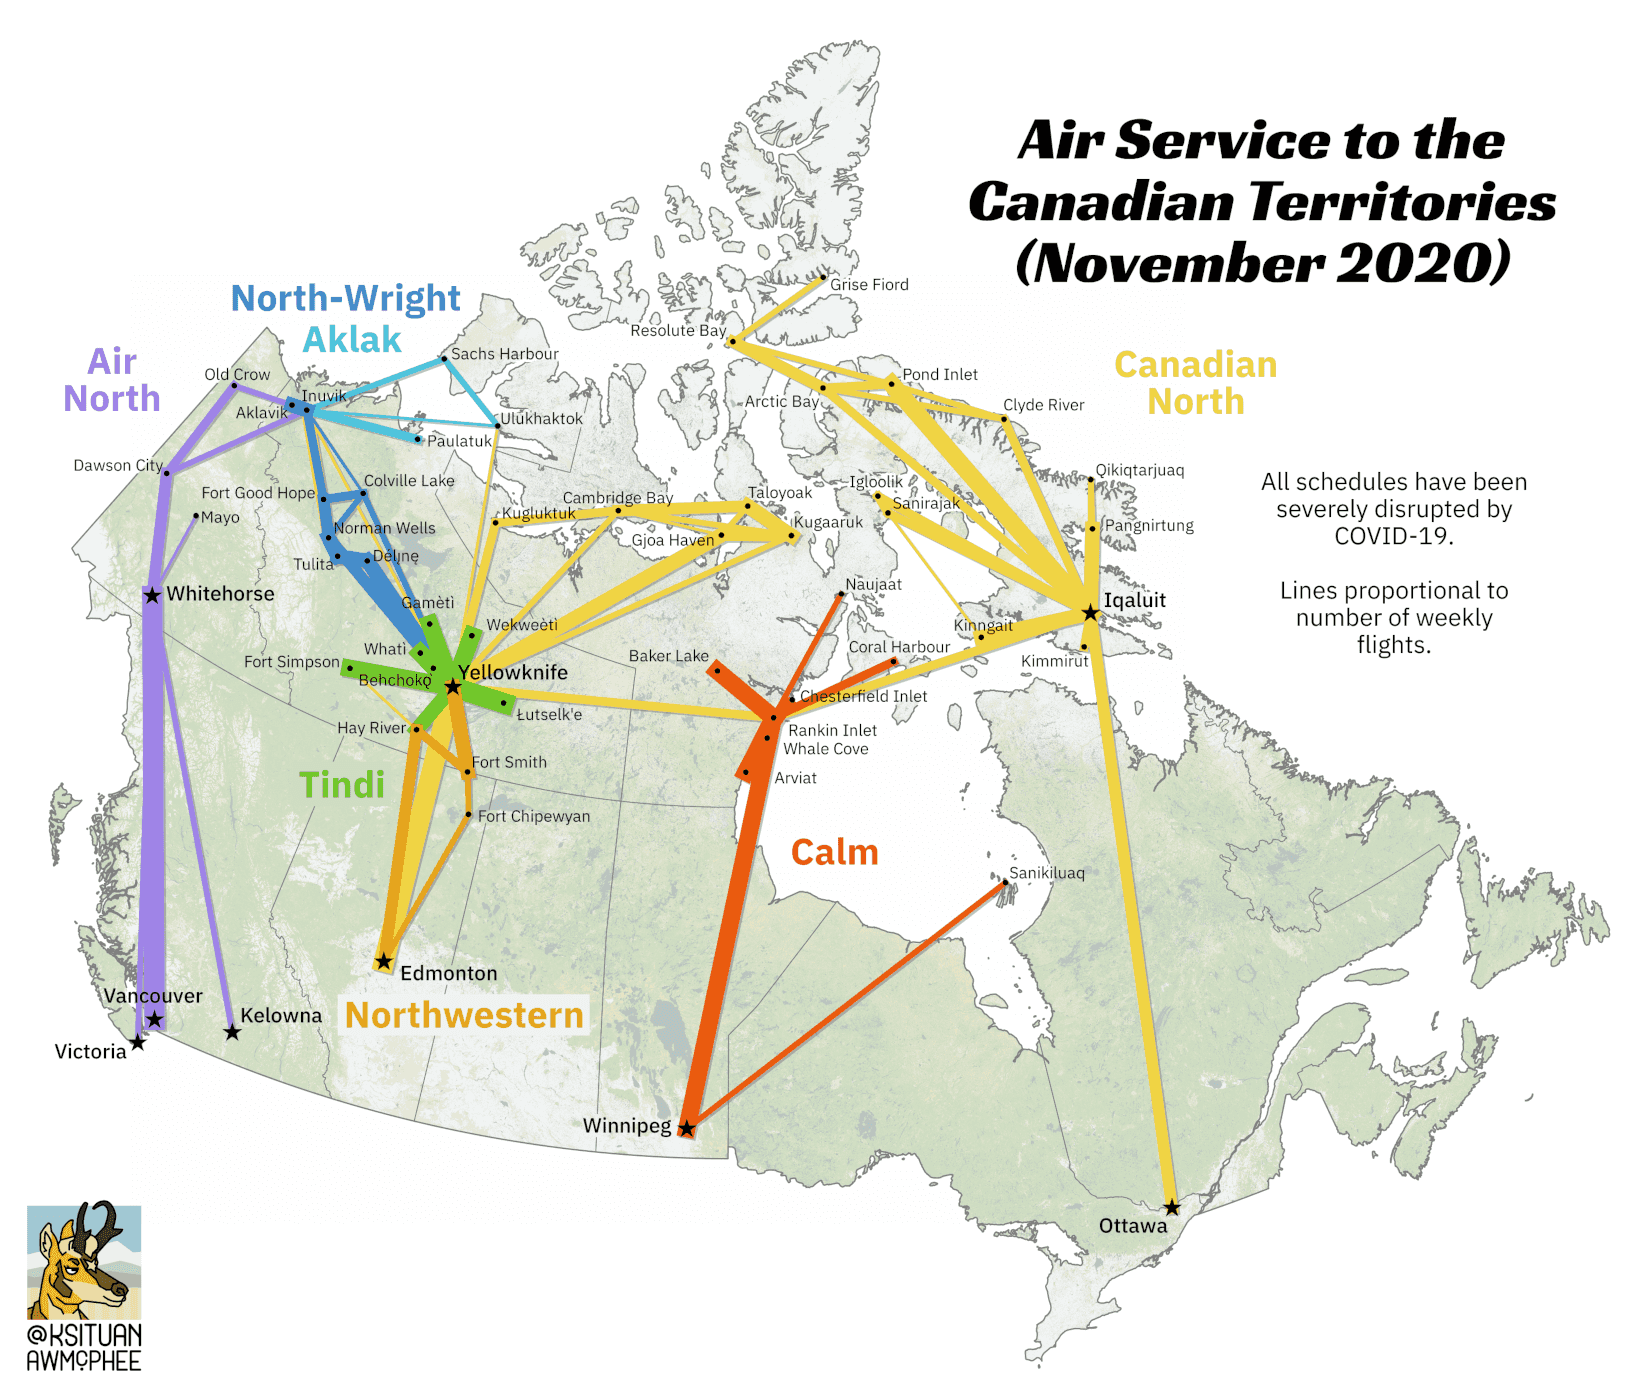 A map of air service to the Canadian Territories as of November 2020.